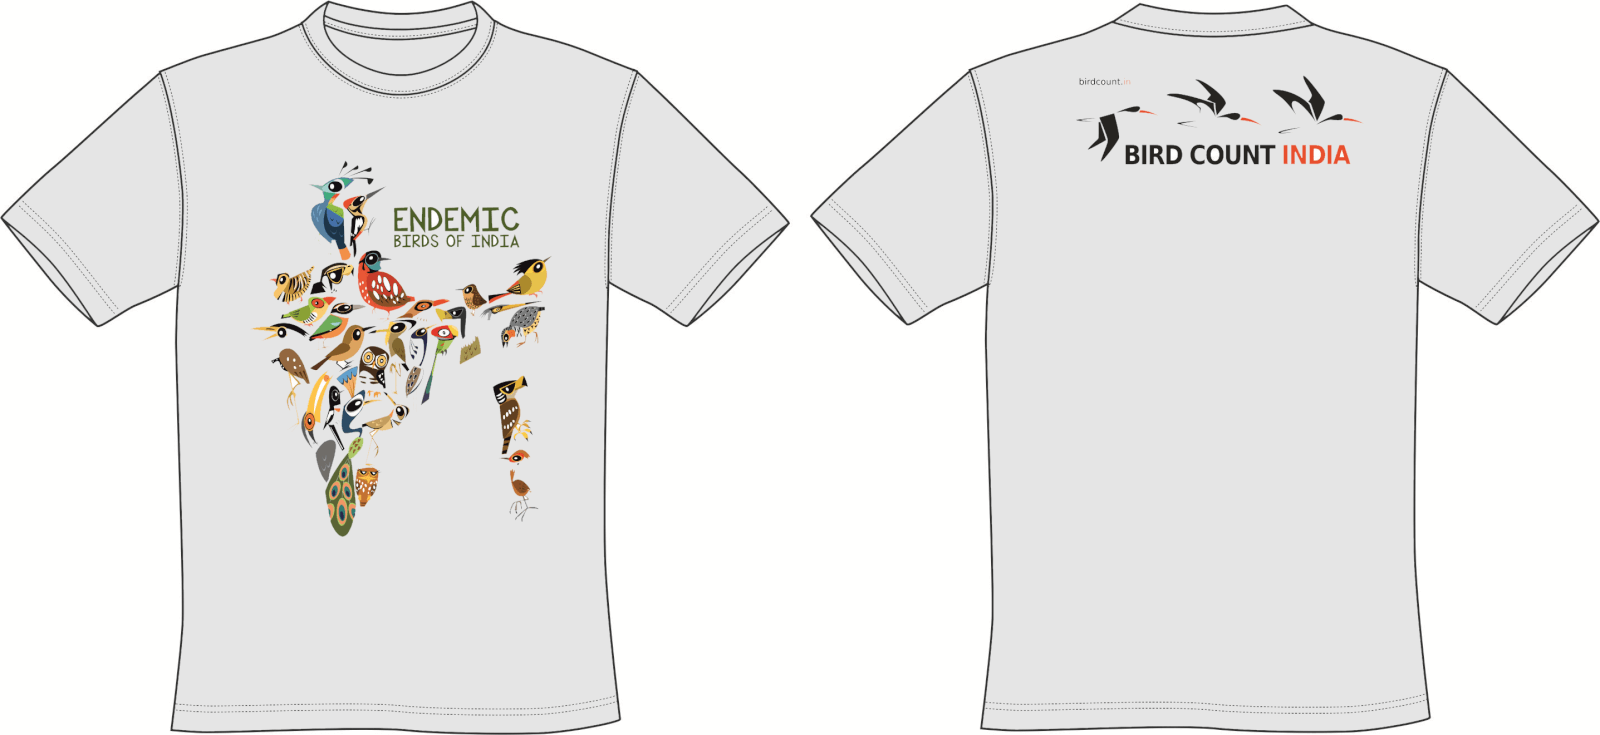 Endemic Birds of India T-shirts - Bird Count India